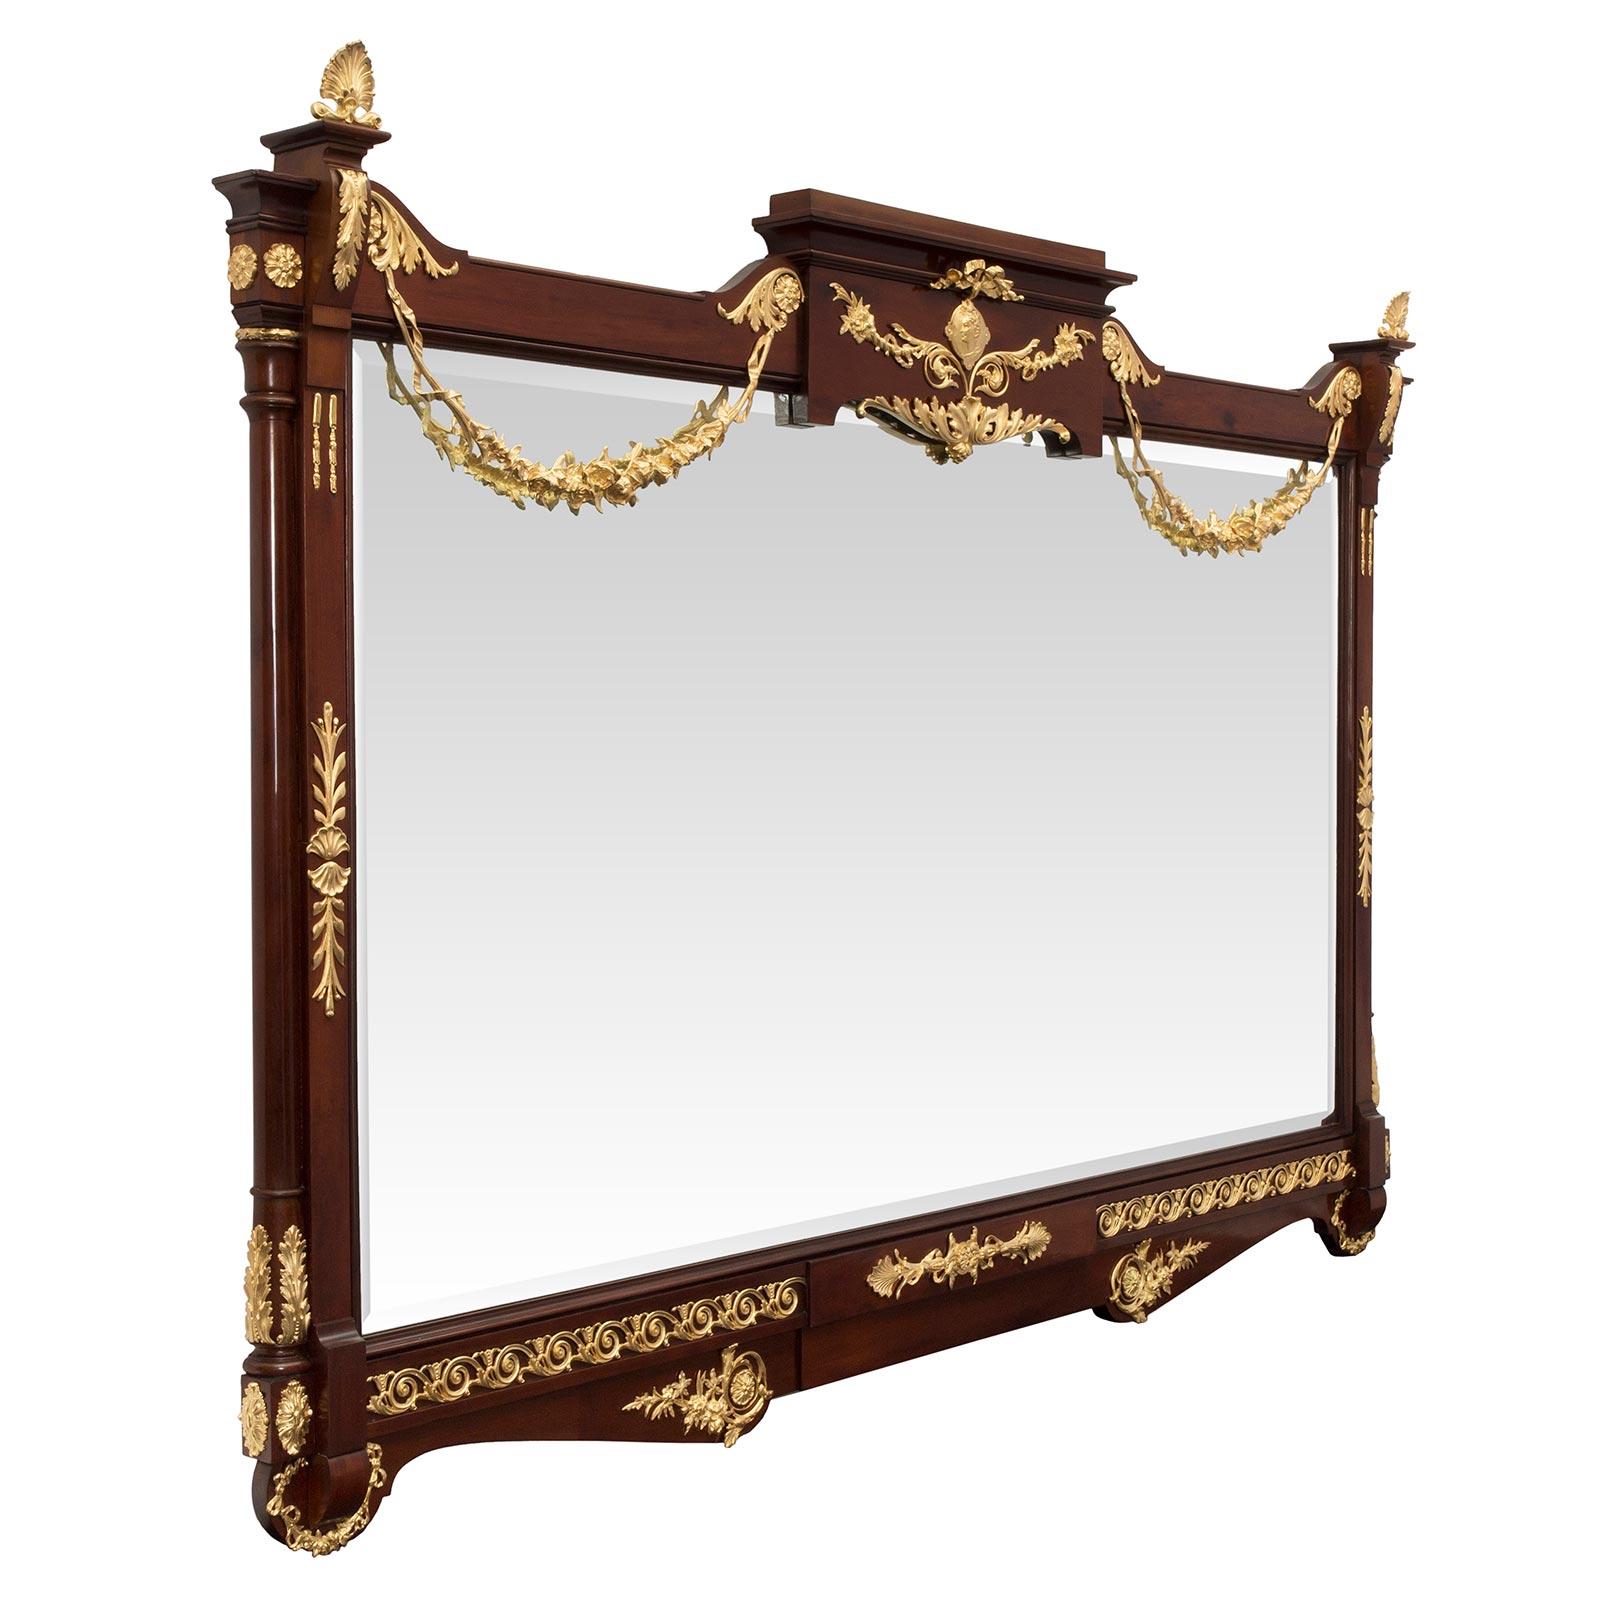 A stunning pair of French 19th century neo-classical st. mahogany and ormolu mirrors. The original beveled mirror plates are framed within a striking and most decorative mahogany border. The scalloped shaped base displays richly chased scrolled and